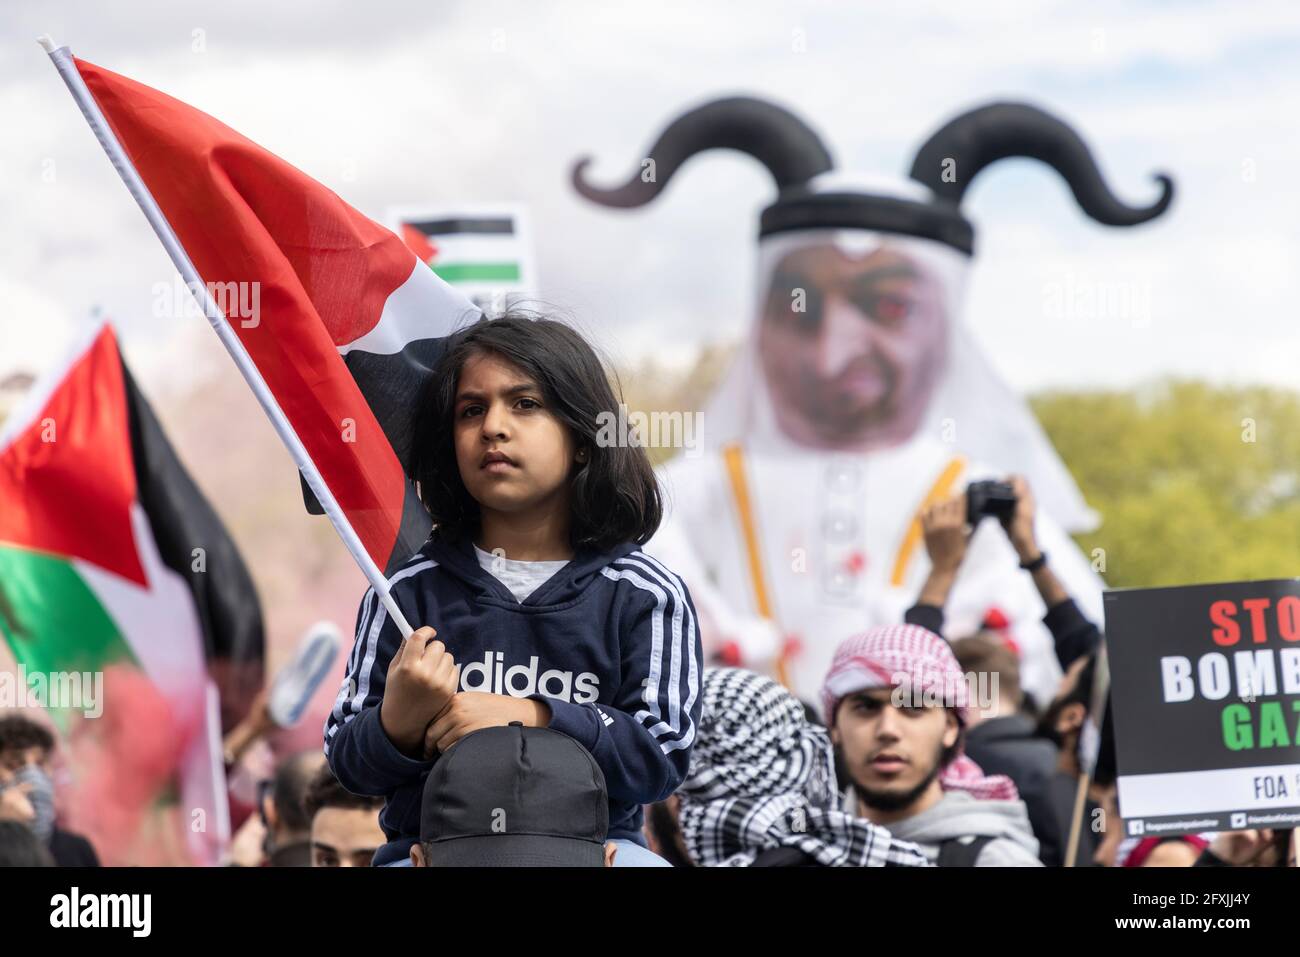 Young girl with Palestinian flag and inflatable demonic figure behind, Free Palestine Protest, Hyde Park, London, 22 May 2021 Stock Photo